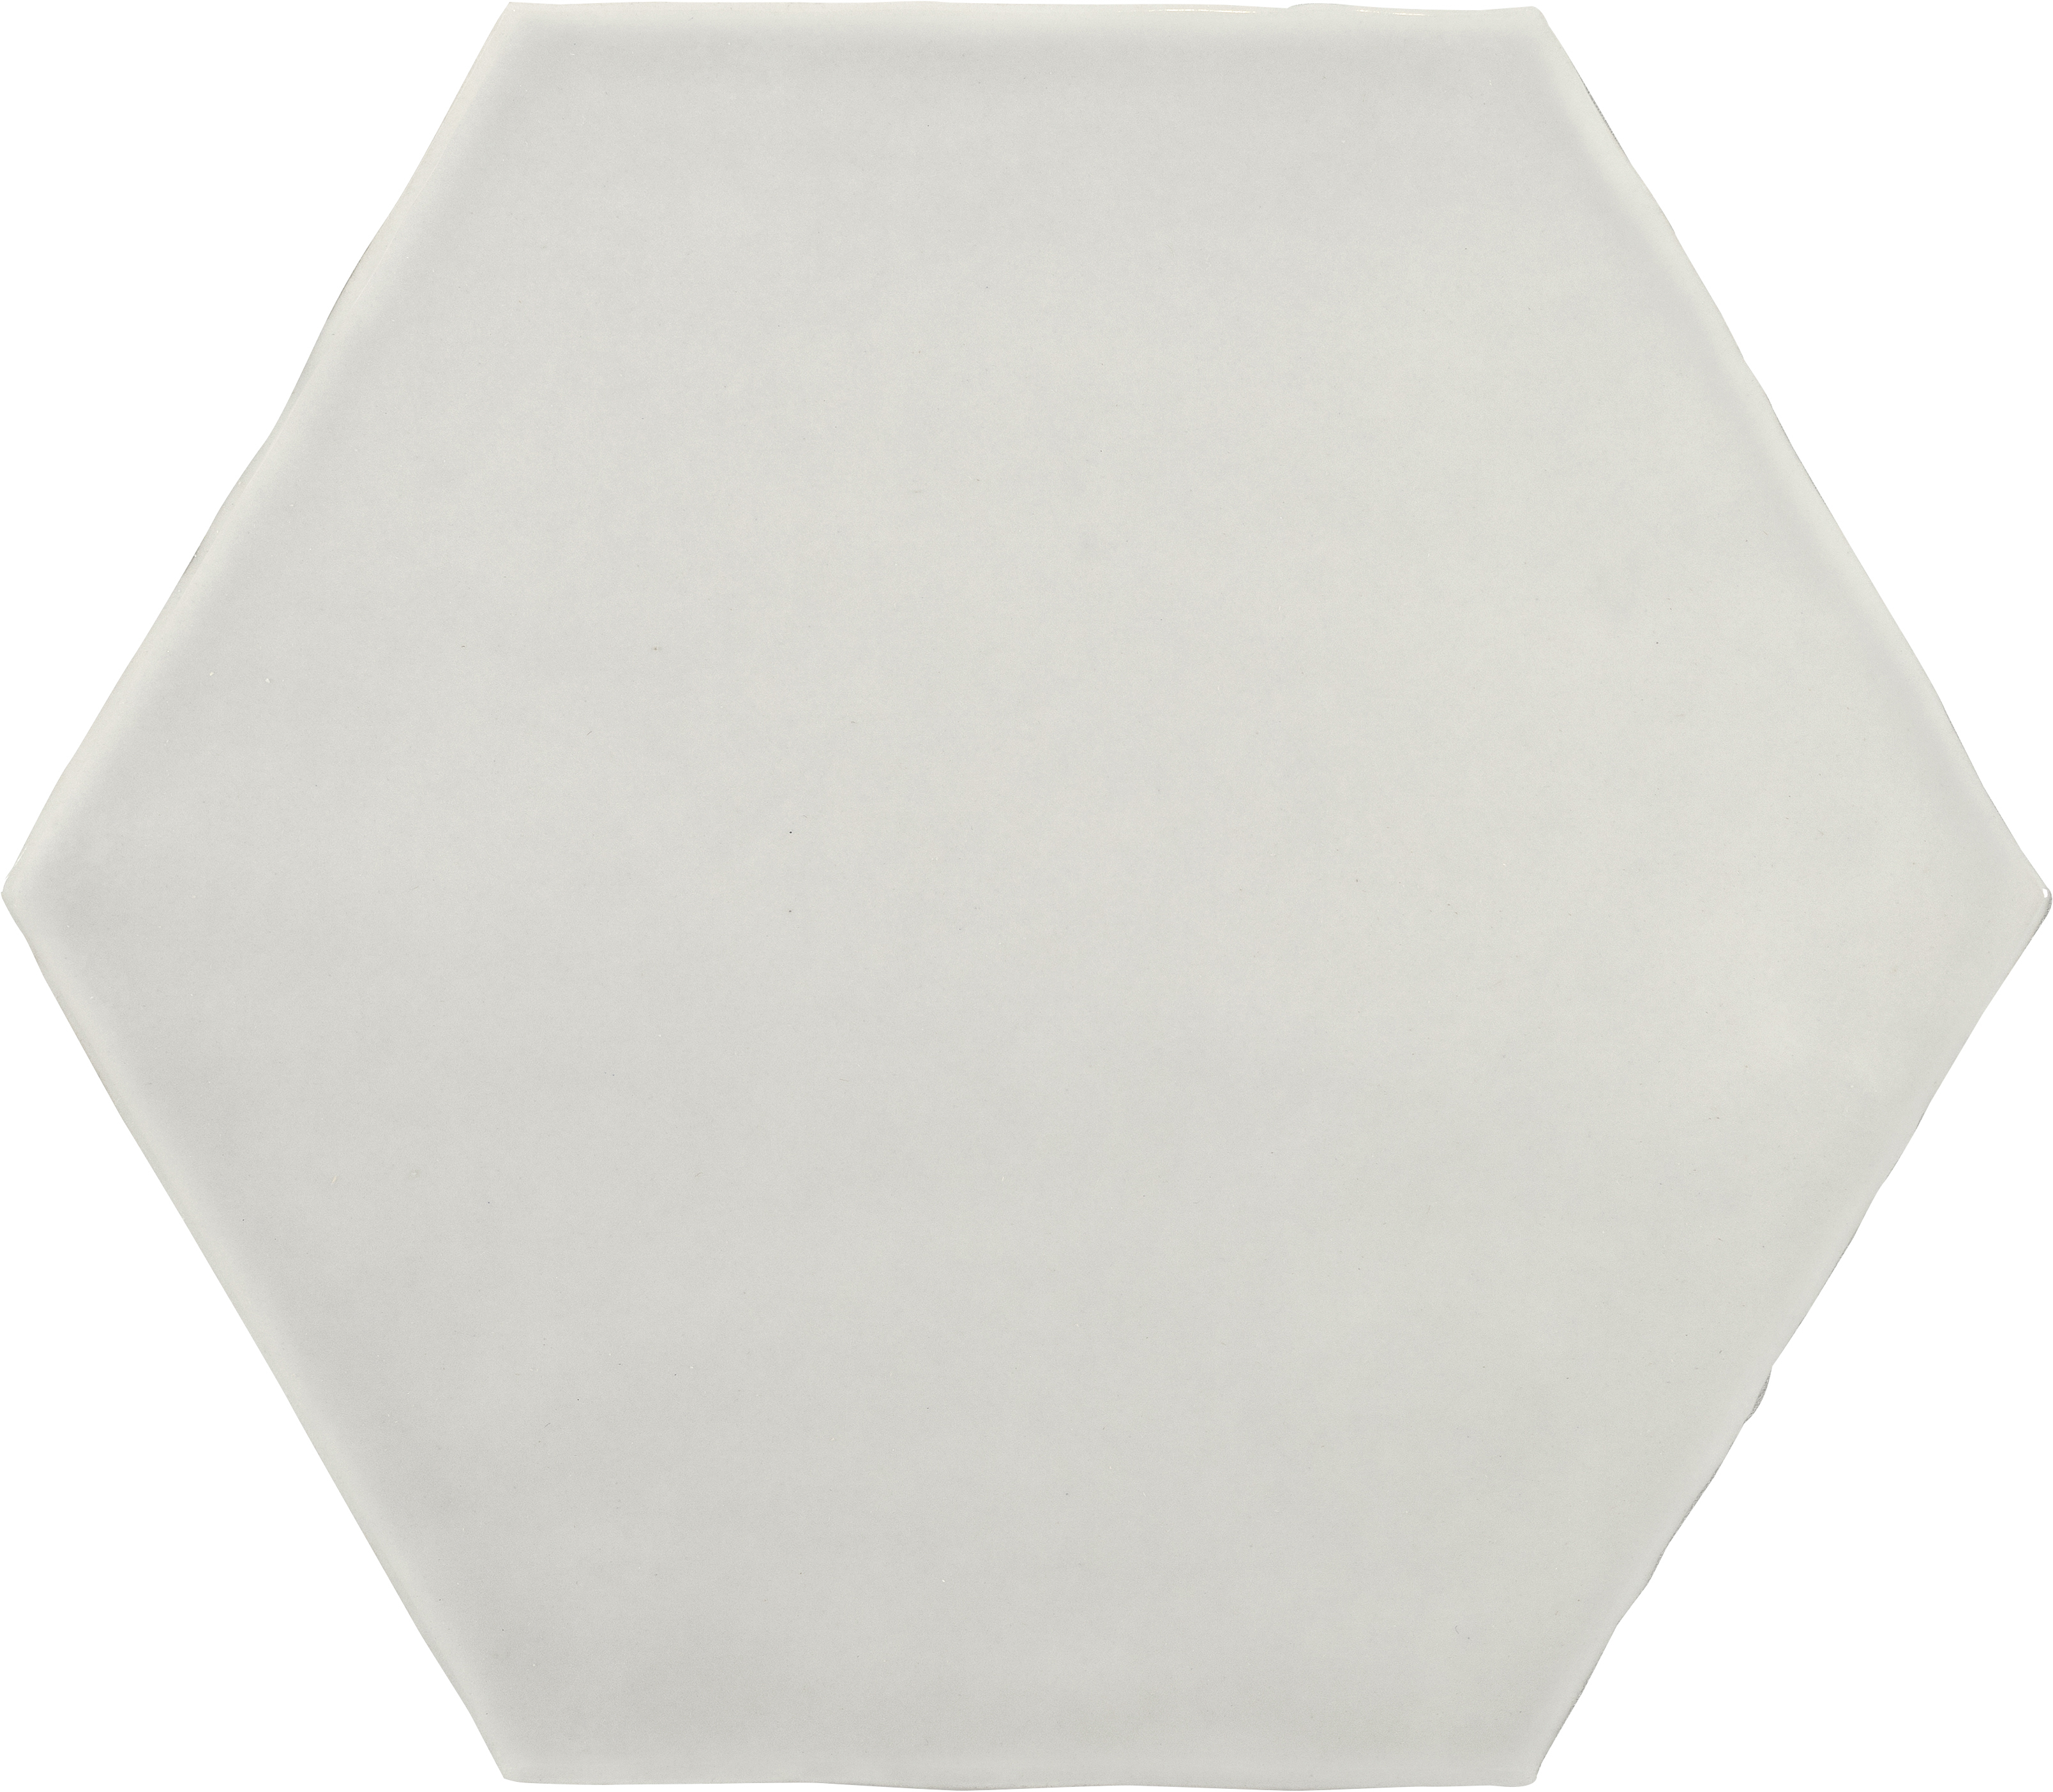 stone pattern glazed ceramic field tile from teramoda anatolia collection distributed by surface group international glossy finish pressed edge 6-inch hexagon shape